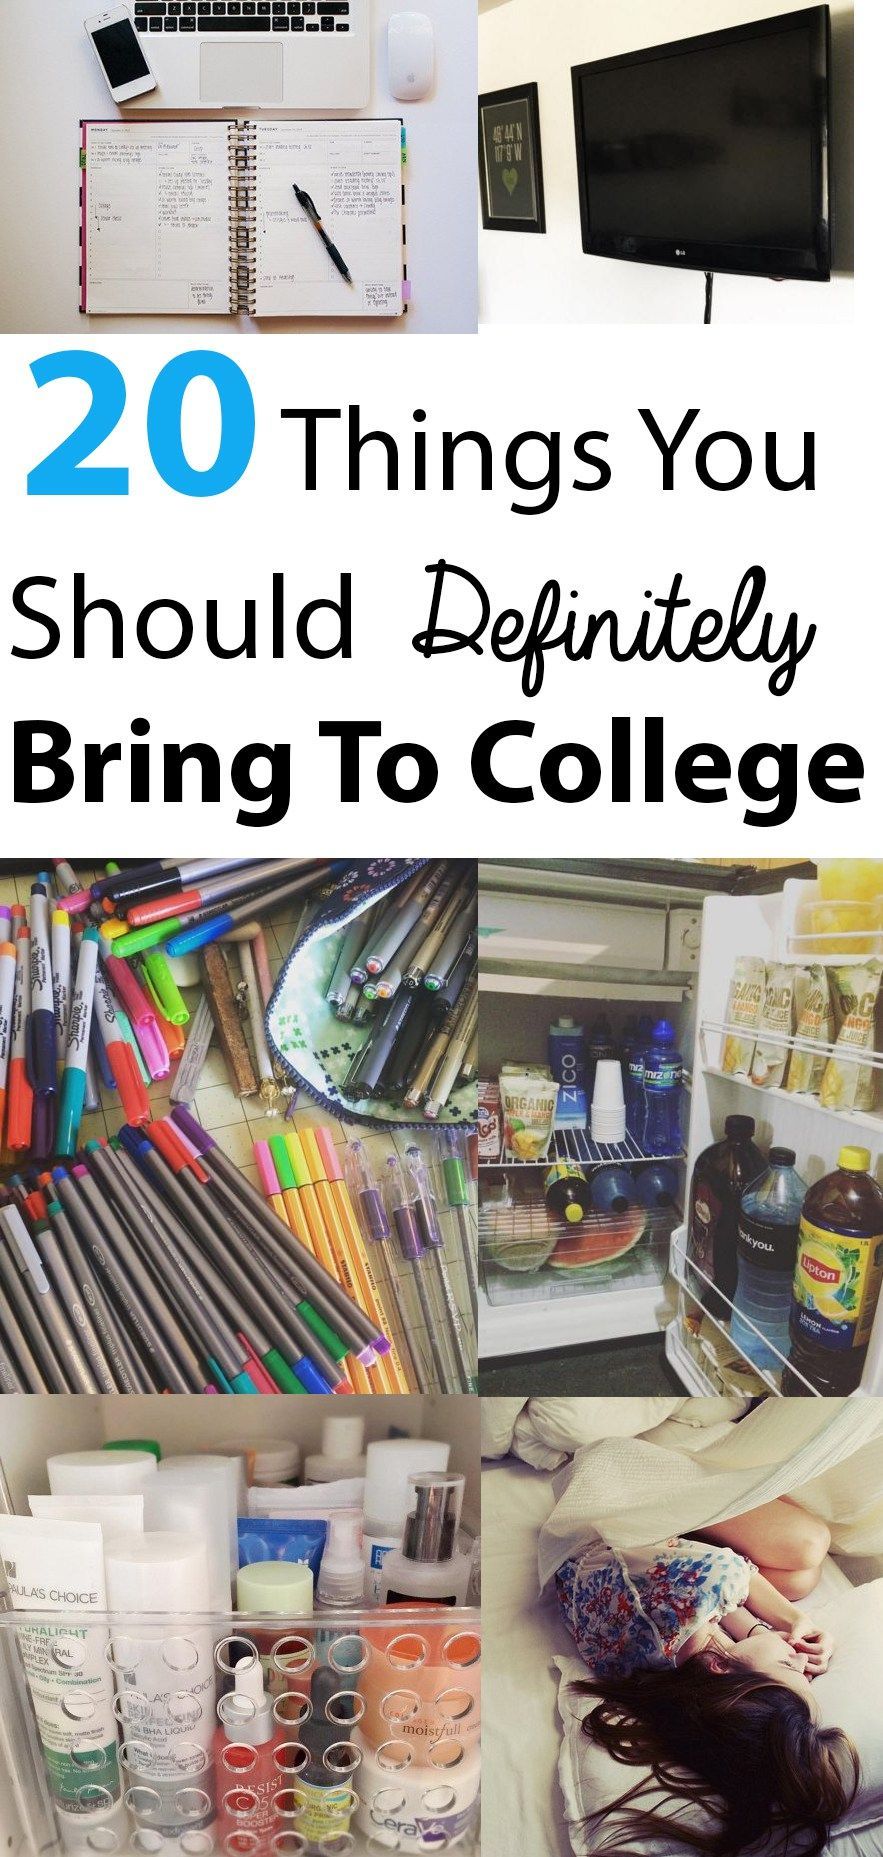 20 Things You Should Definitely Bring To College - Society19 - 20 Things You Should Definitely Bring To College - Society19 -   17 diy Projects for college ideas